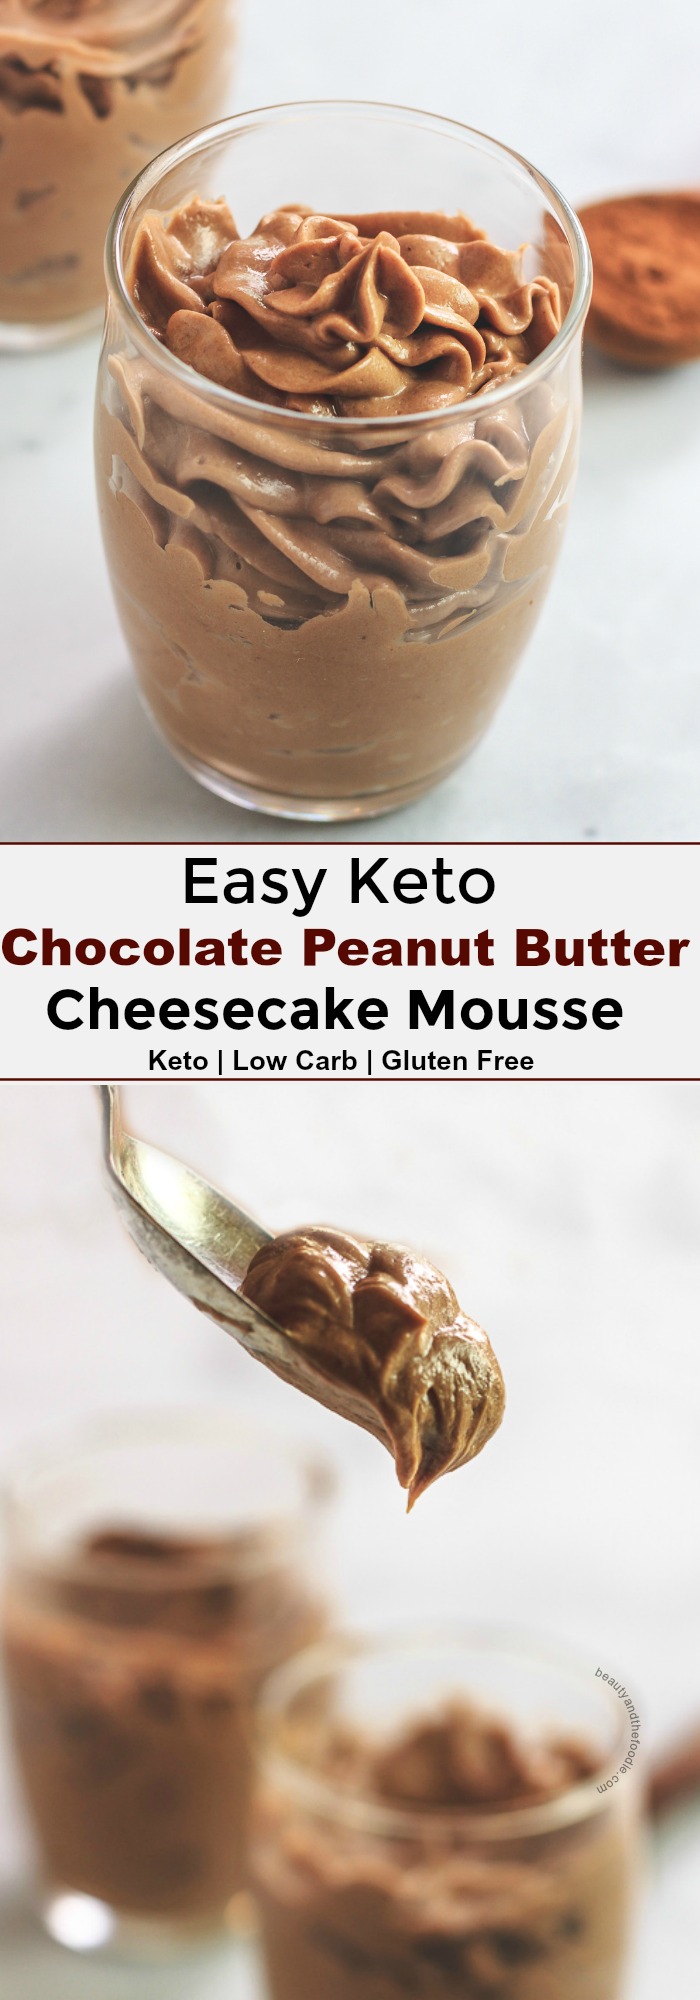 Low Carb Chocolate Peanut Butter Cheesecake Mousse